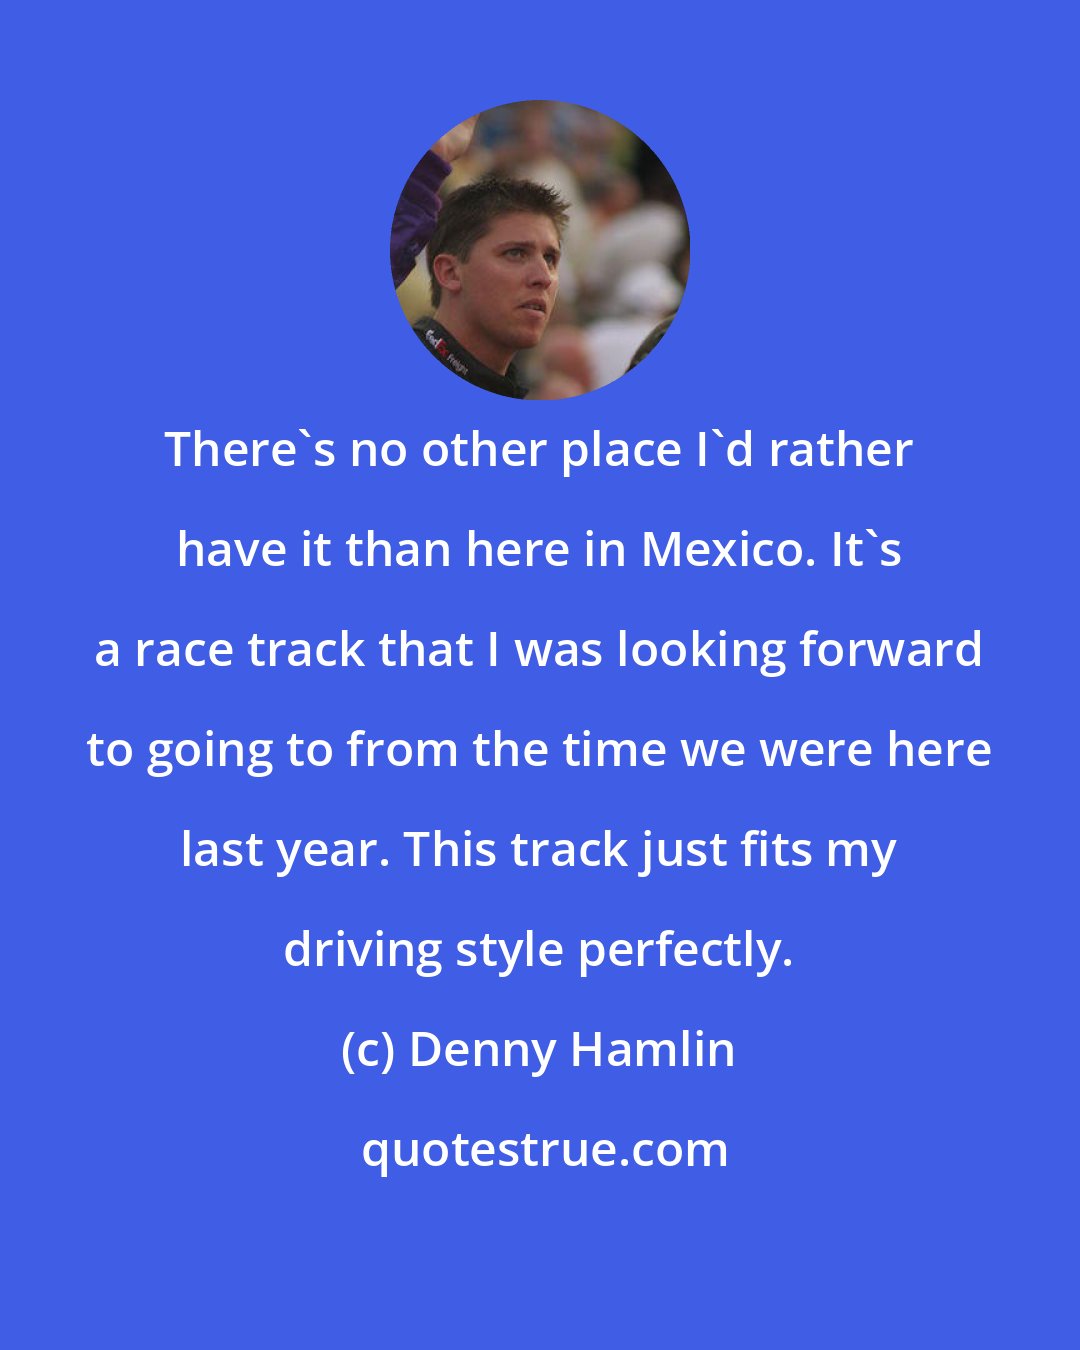 Denny Hamlin: There's no other place I'd rather have it than here in Mexico. It's a race track that I was looking forward to going to from the time we were here last year. This track just fits my driving style perfectly.